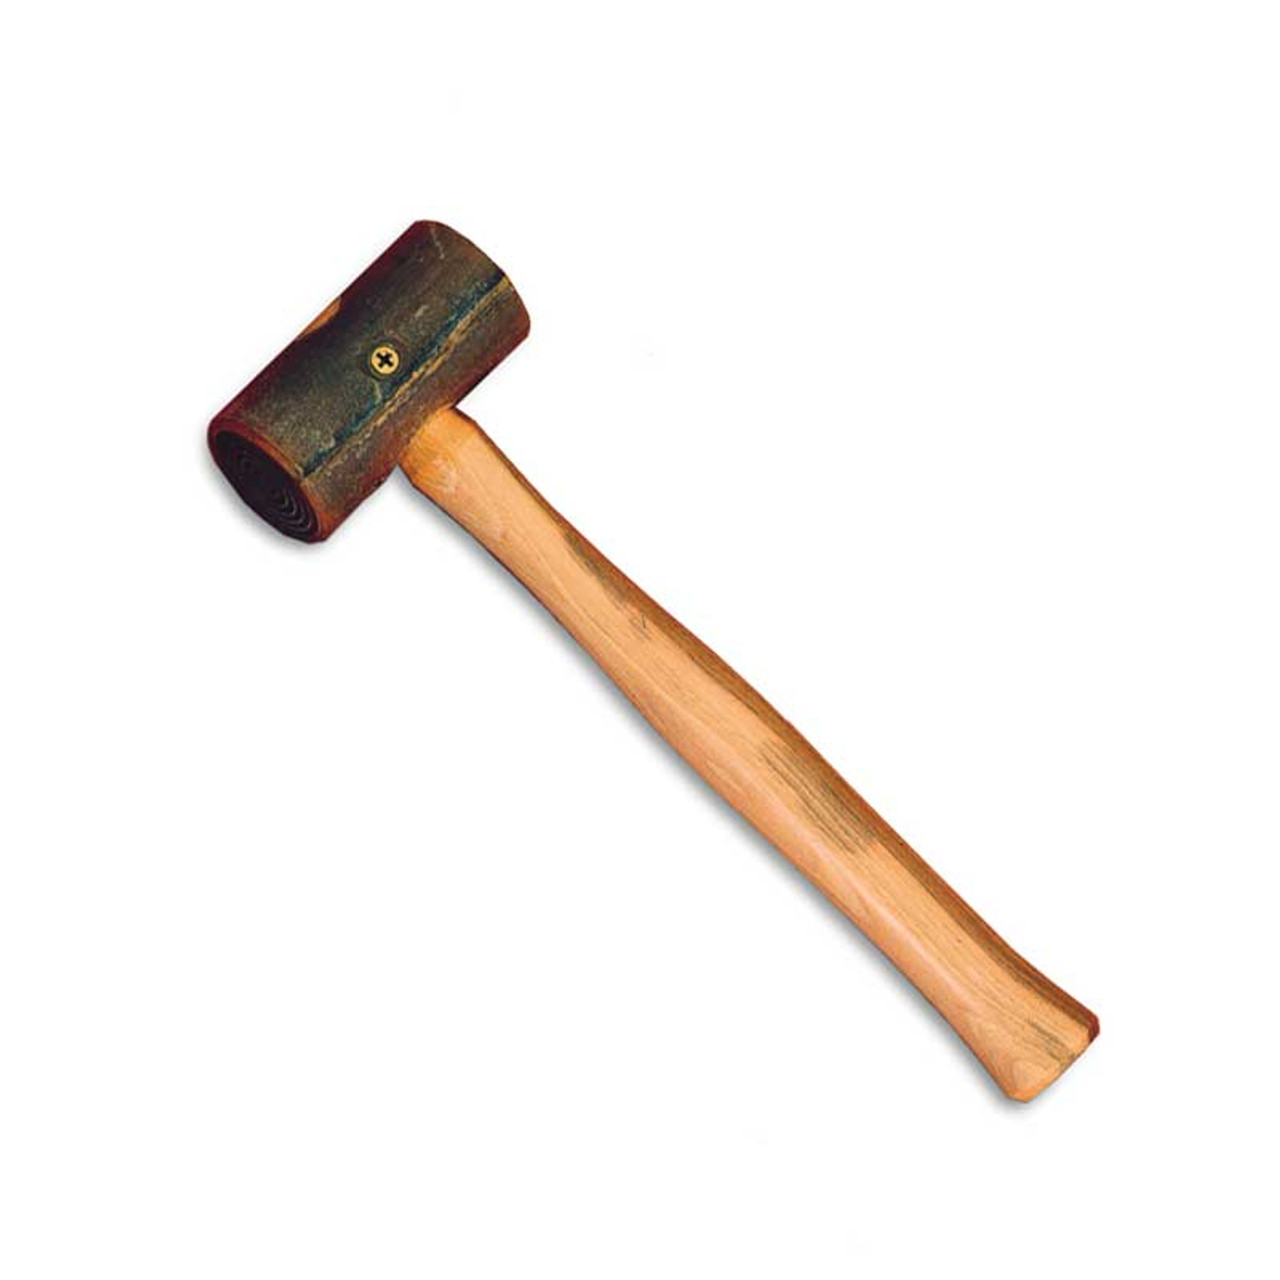 Premium Rawhide Mallet Hammer for Jewelry or Metal 4 oz